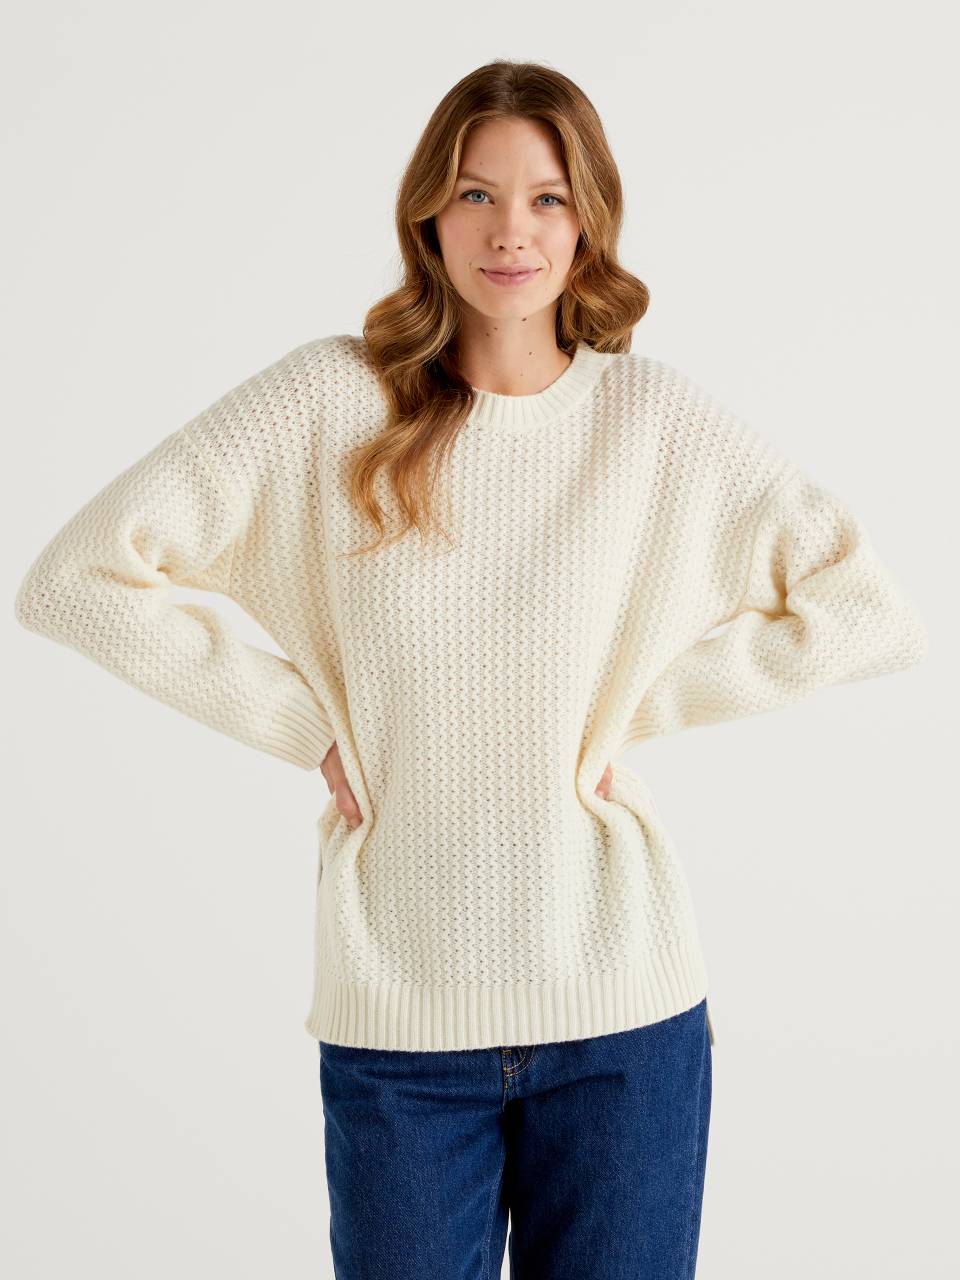 Benetton Sweater in wool blend with slits - 1344D102D_000